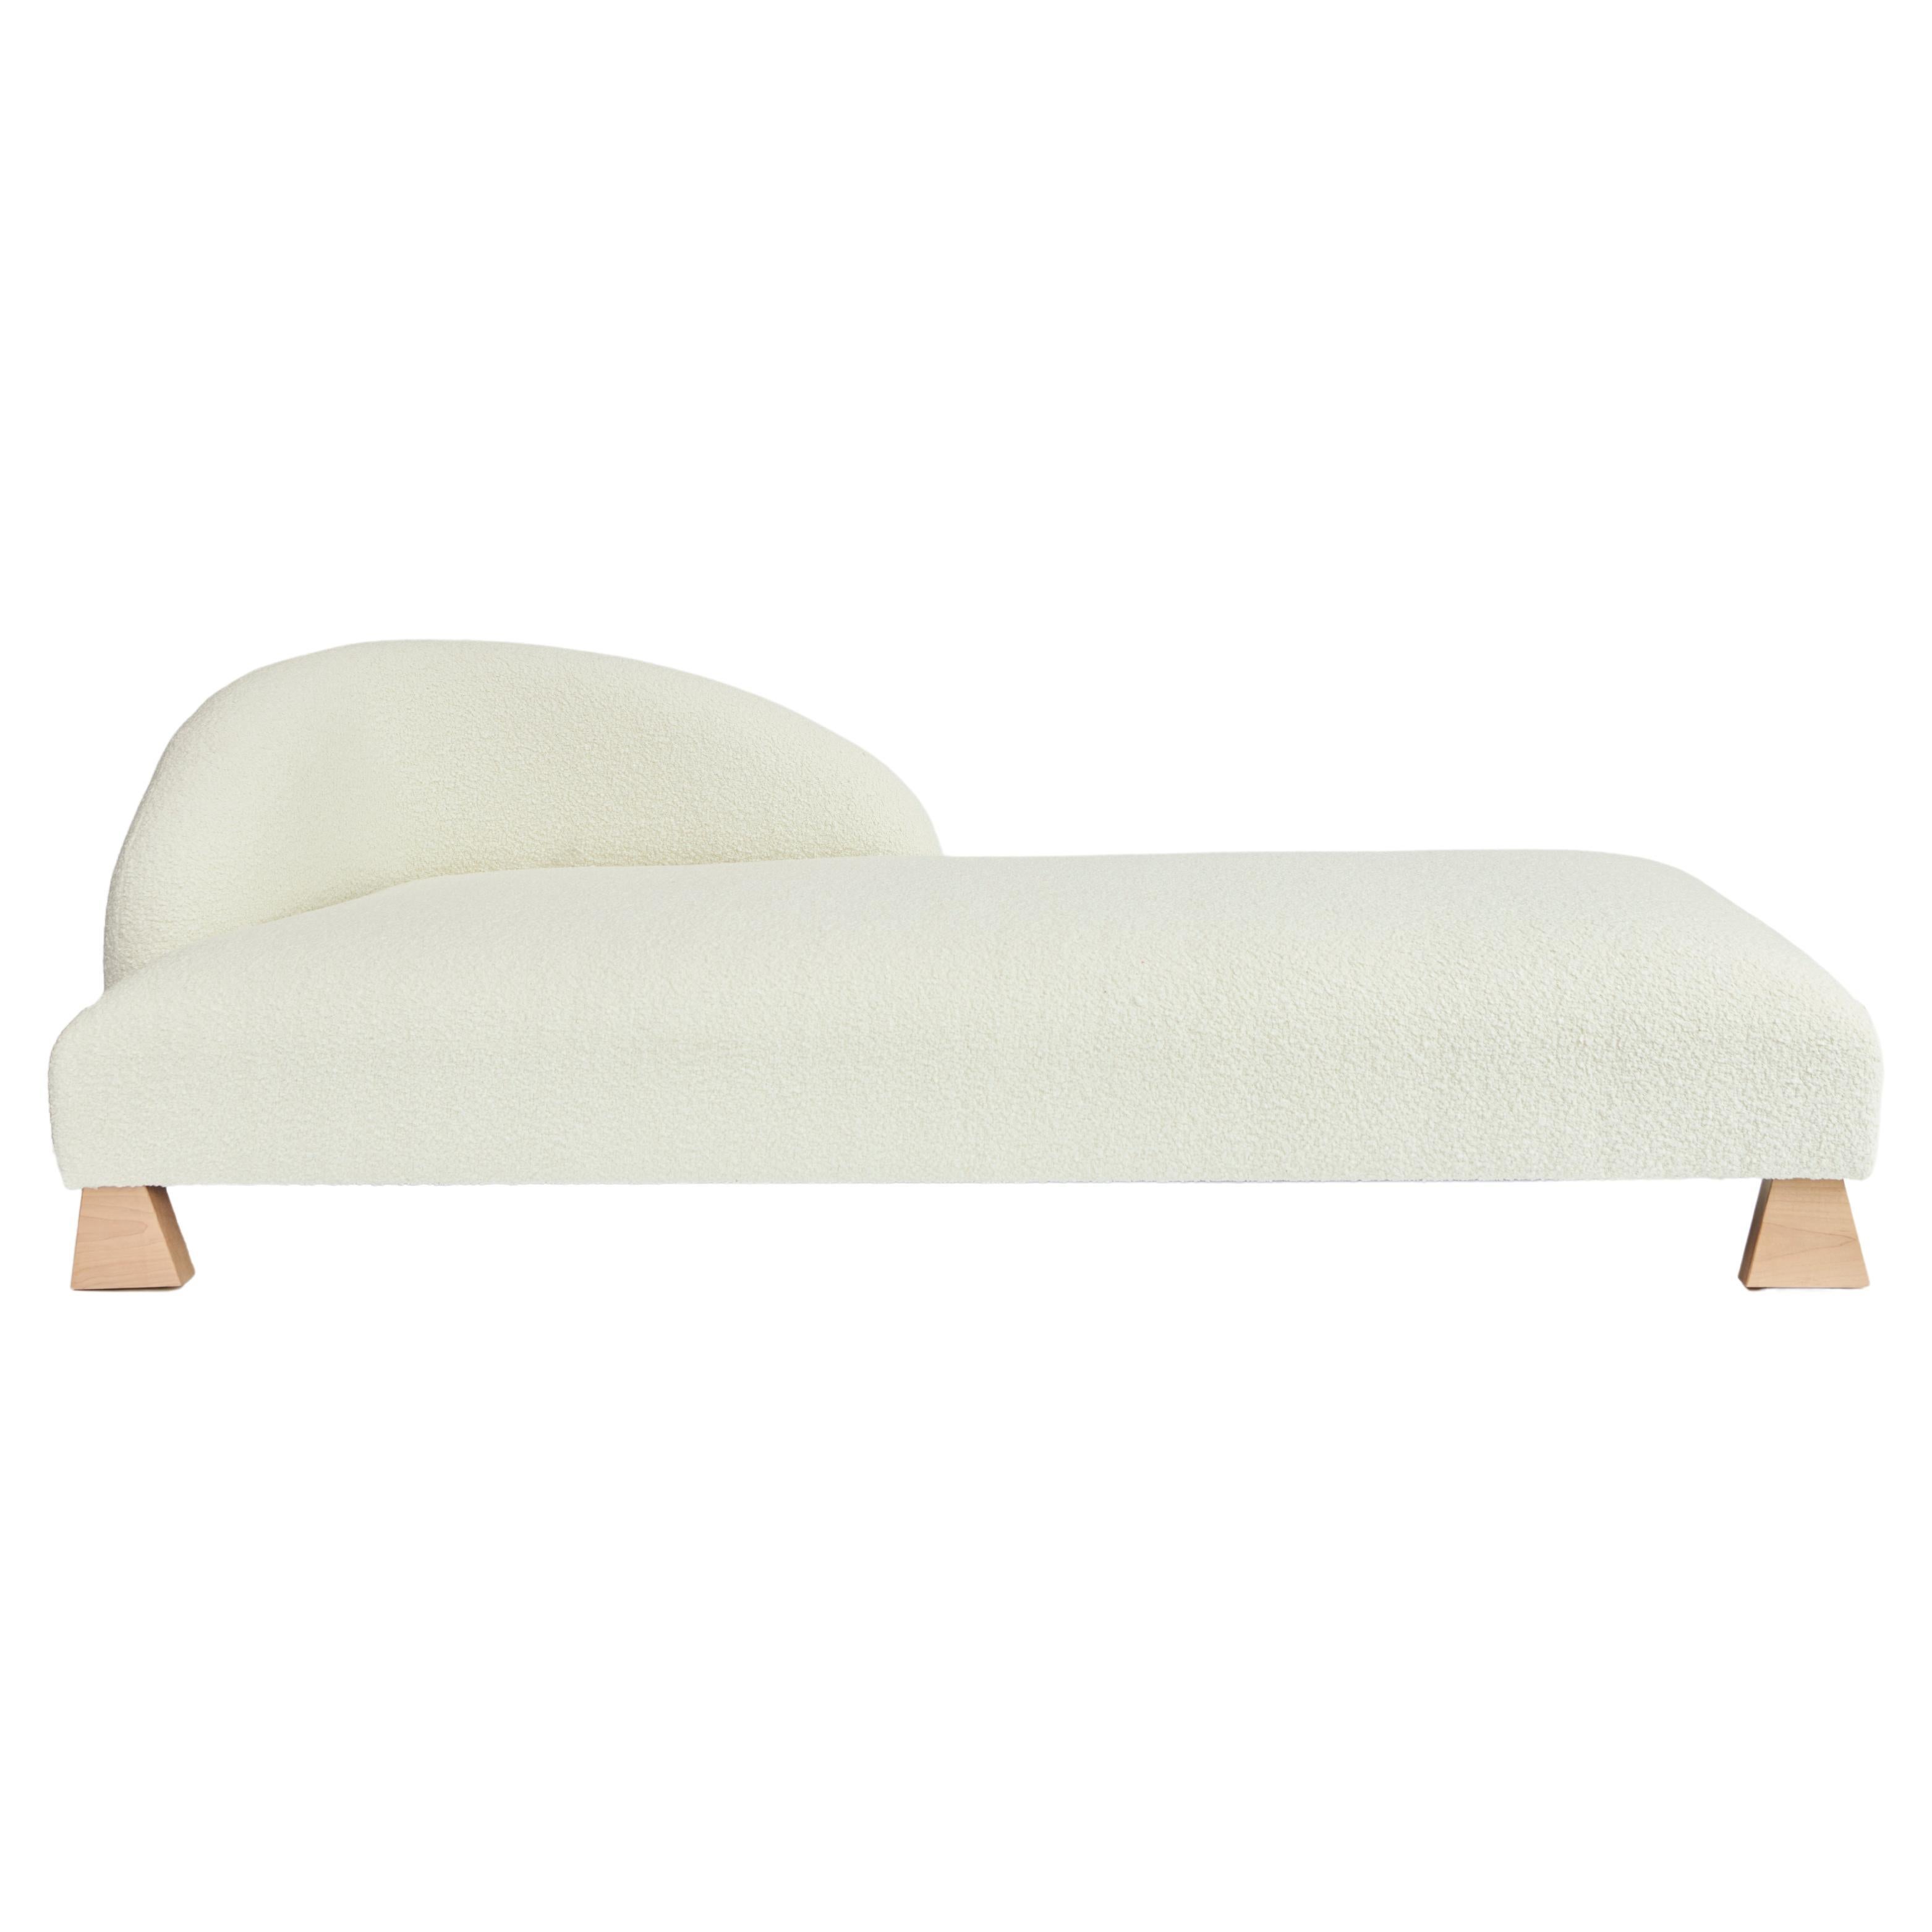 Lisette Chaise, Ivory Bouclé & Maple Chaise by Christian Siriano For Sale